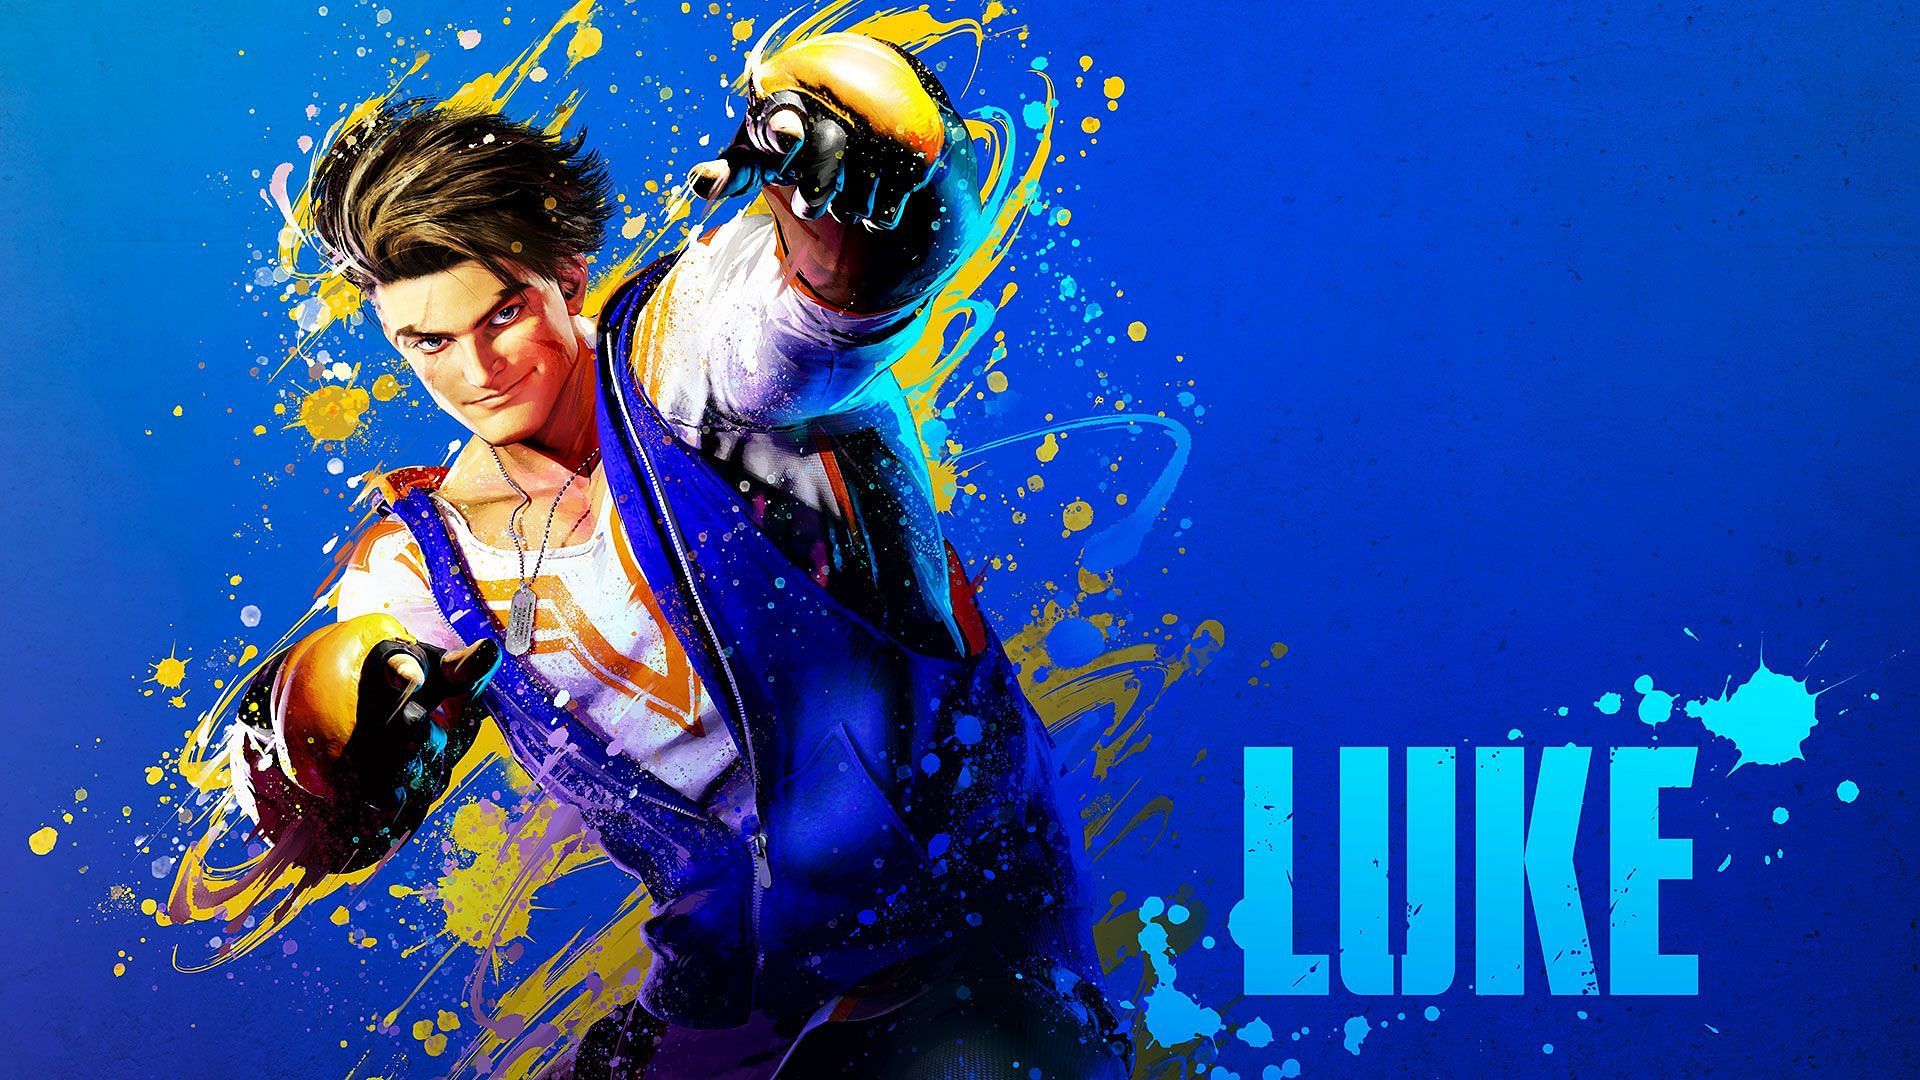 Street Fighter V: Champion Edition Final DLC Character Luke to